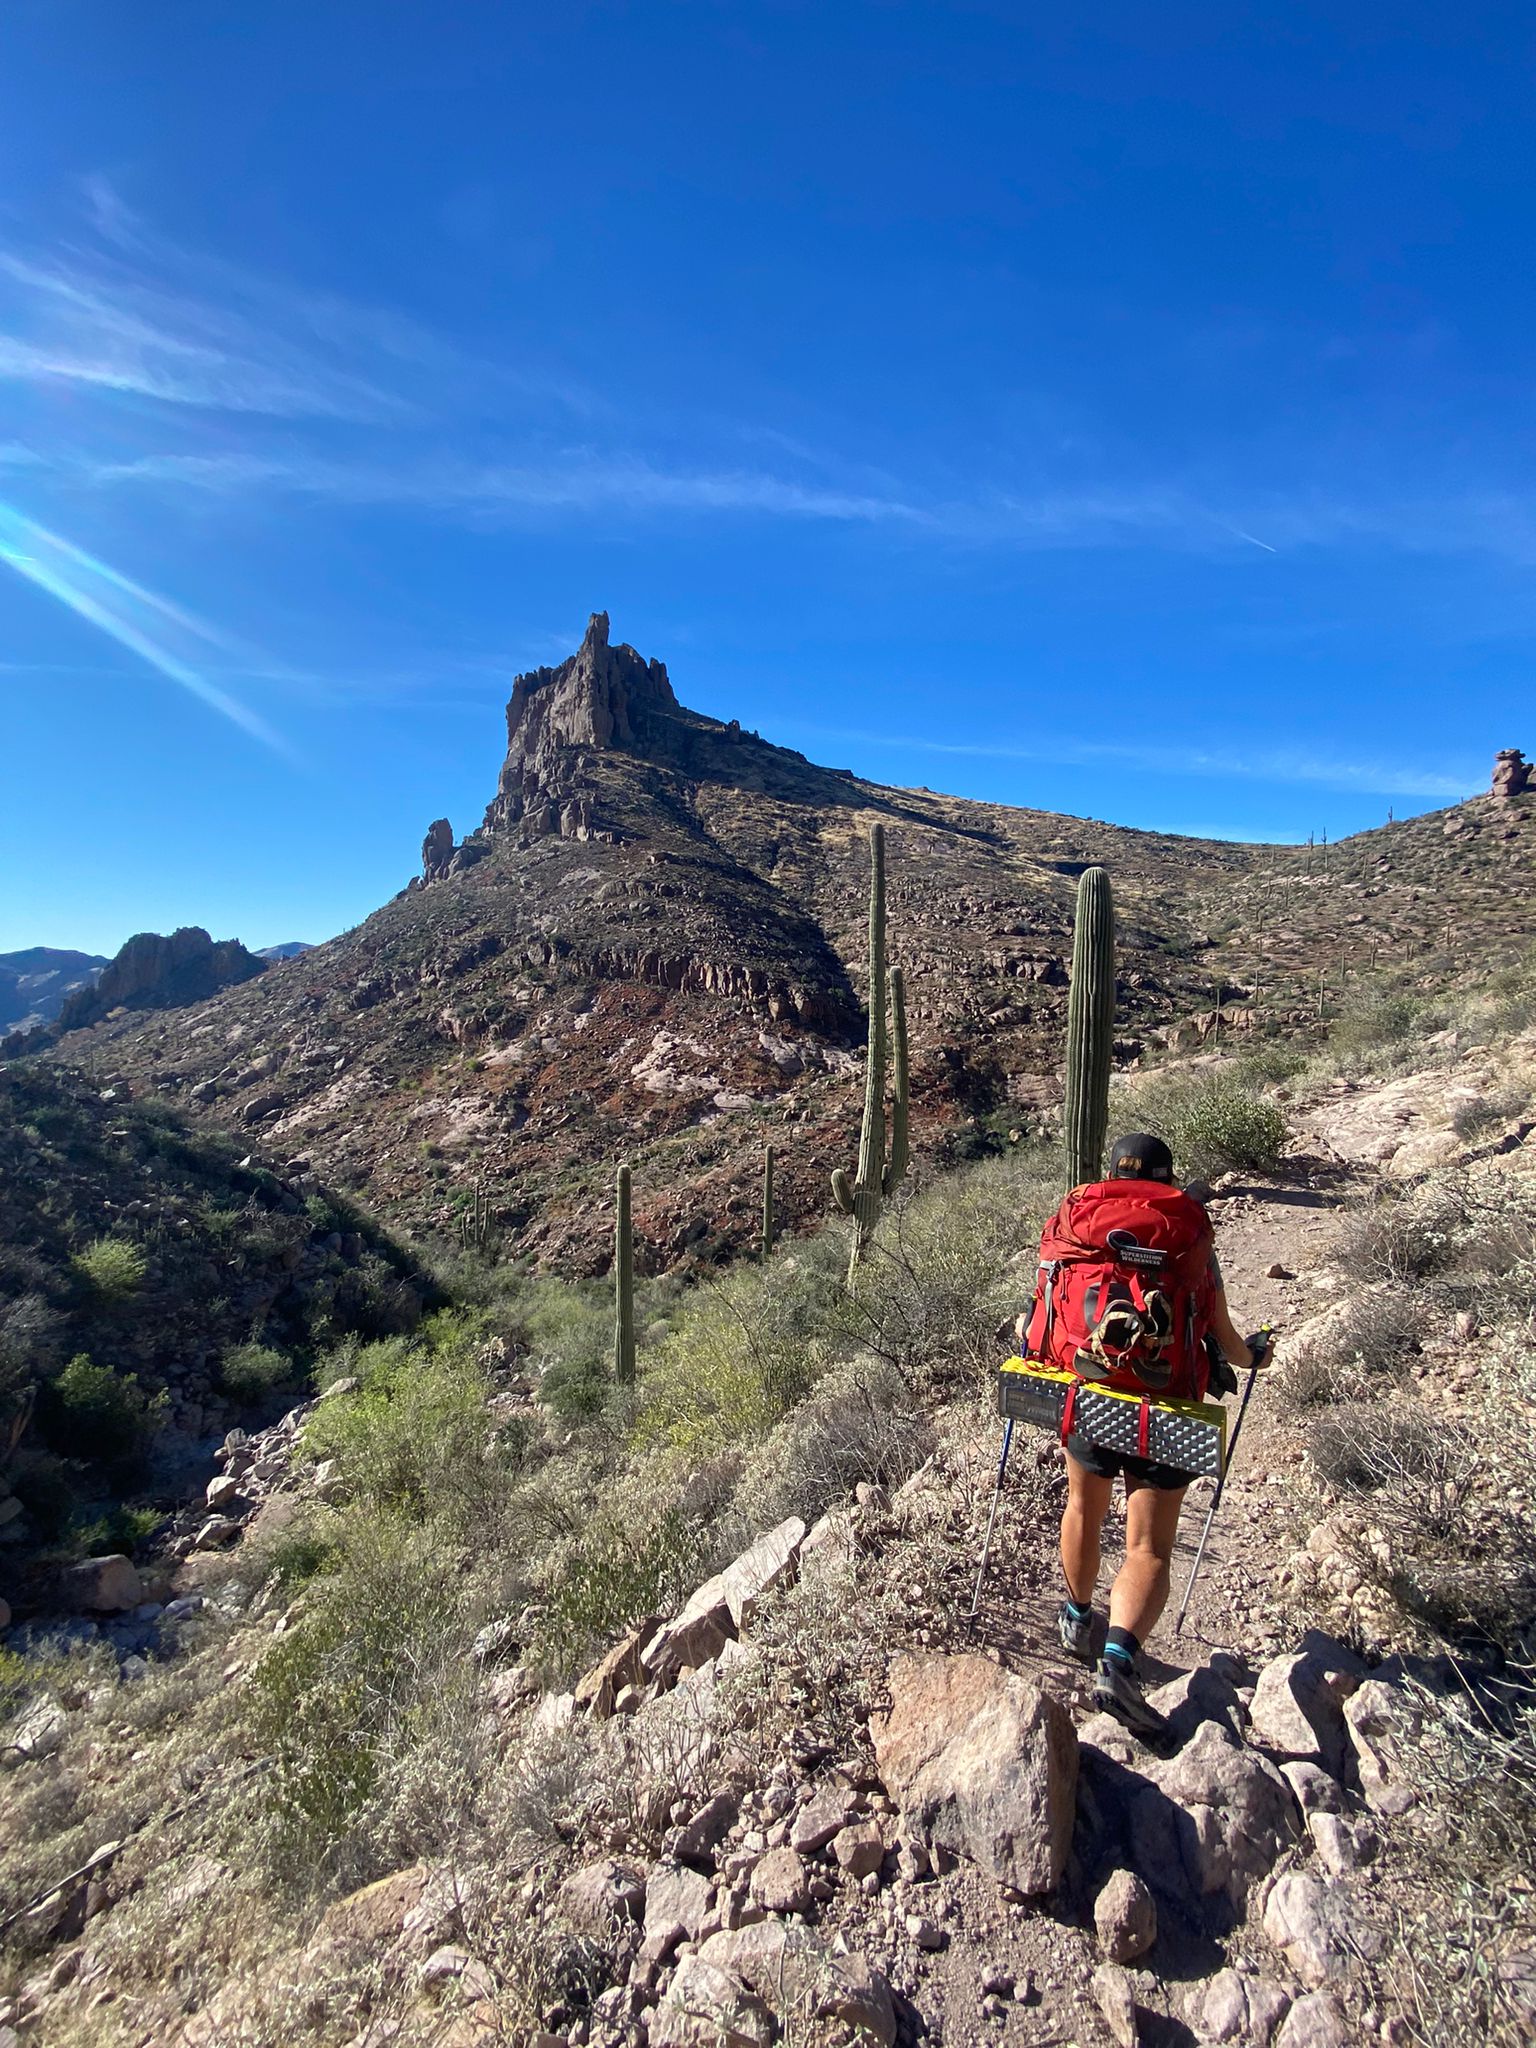 Traveling through the Superstition Mountains